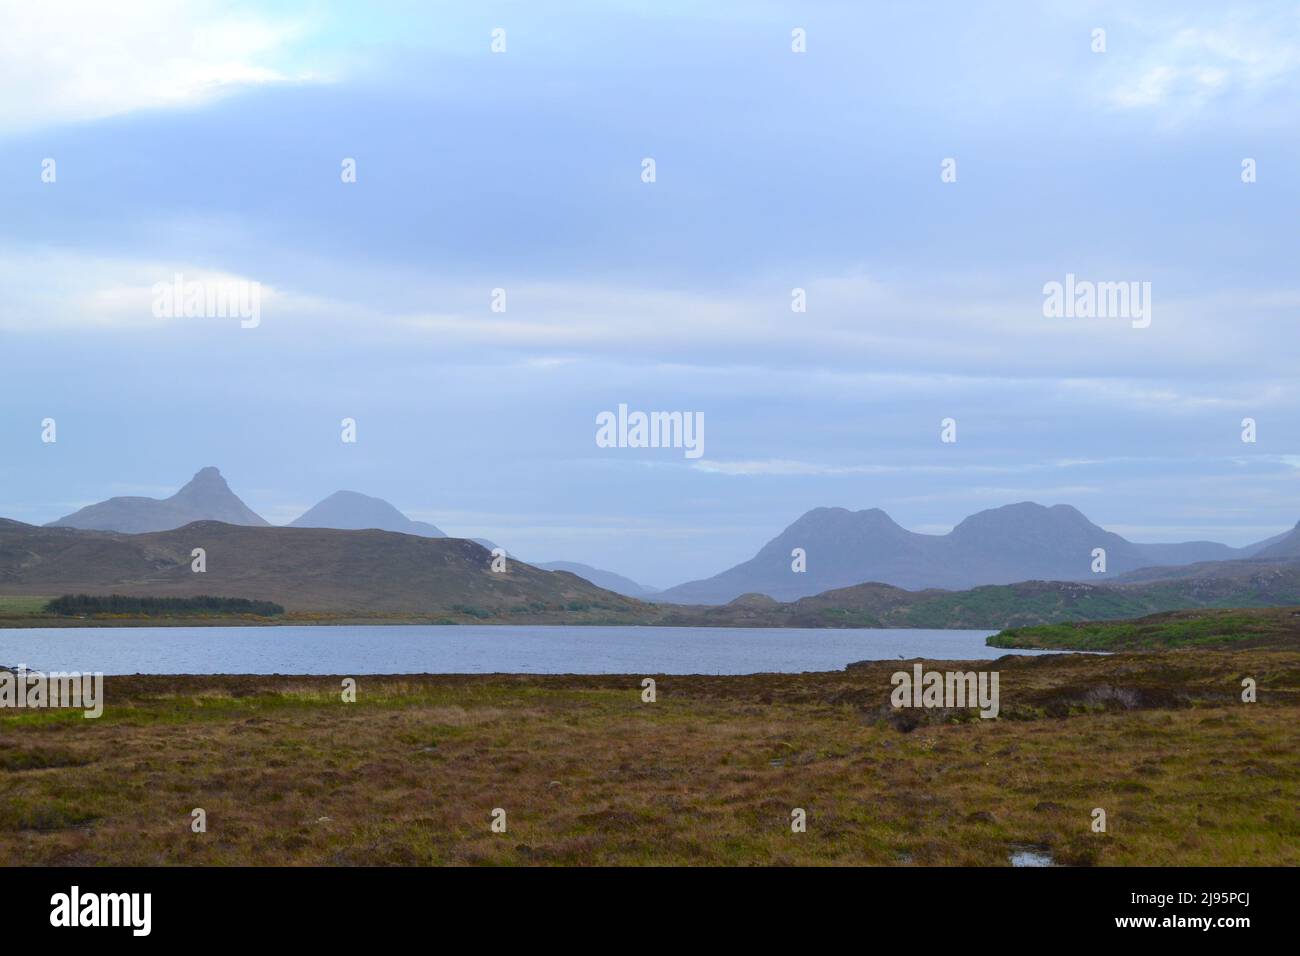 Wild mountain scenery in NW Scotland. Stac Poillaidh, on left, Cul Mor, on right, early evening, Scotland's Monument Valley, lonely wilderness Stock Photo